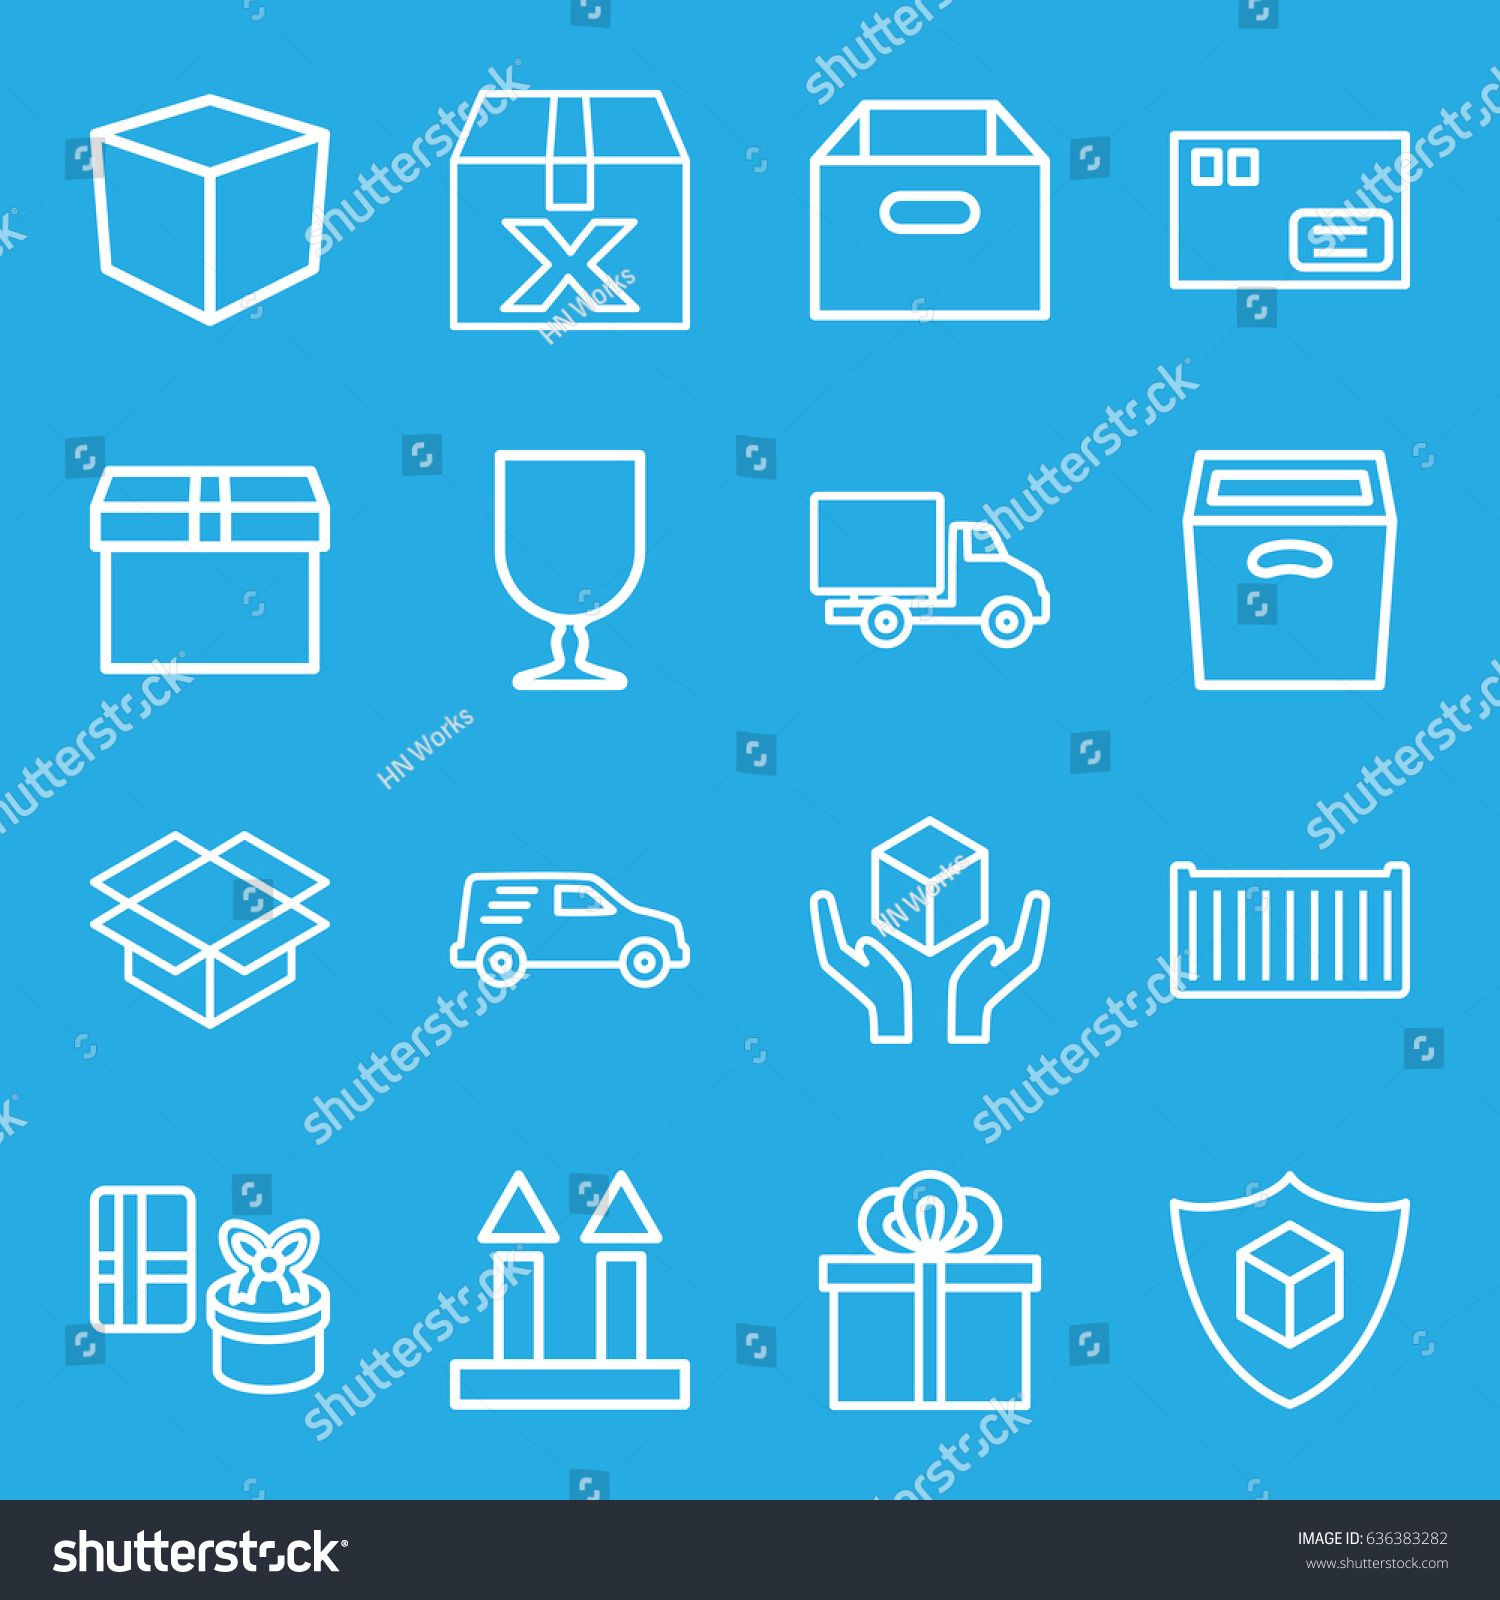 Parcel icons set. set of 16 parcel outline icons such as cargo box, cargo arrow up, handle with care, box, delivery car, gift, parcel #636383282